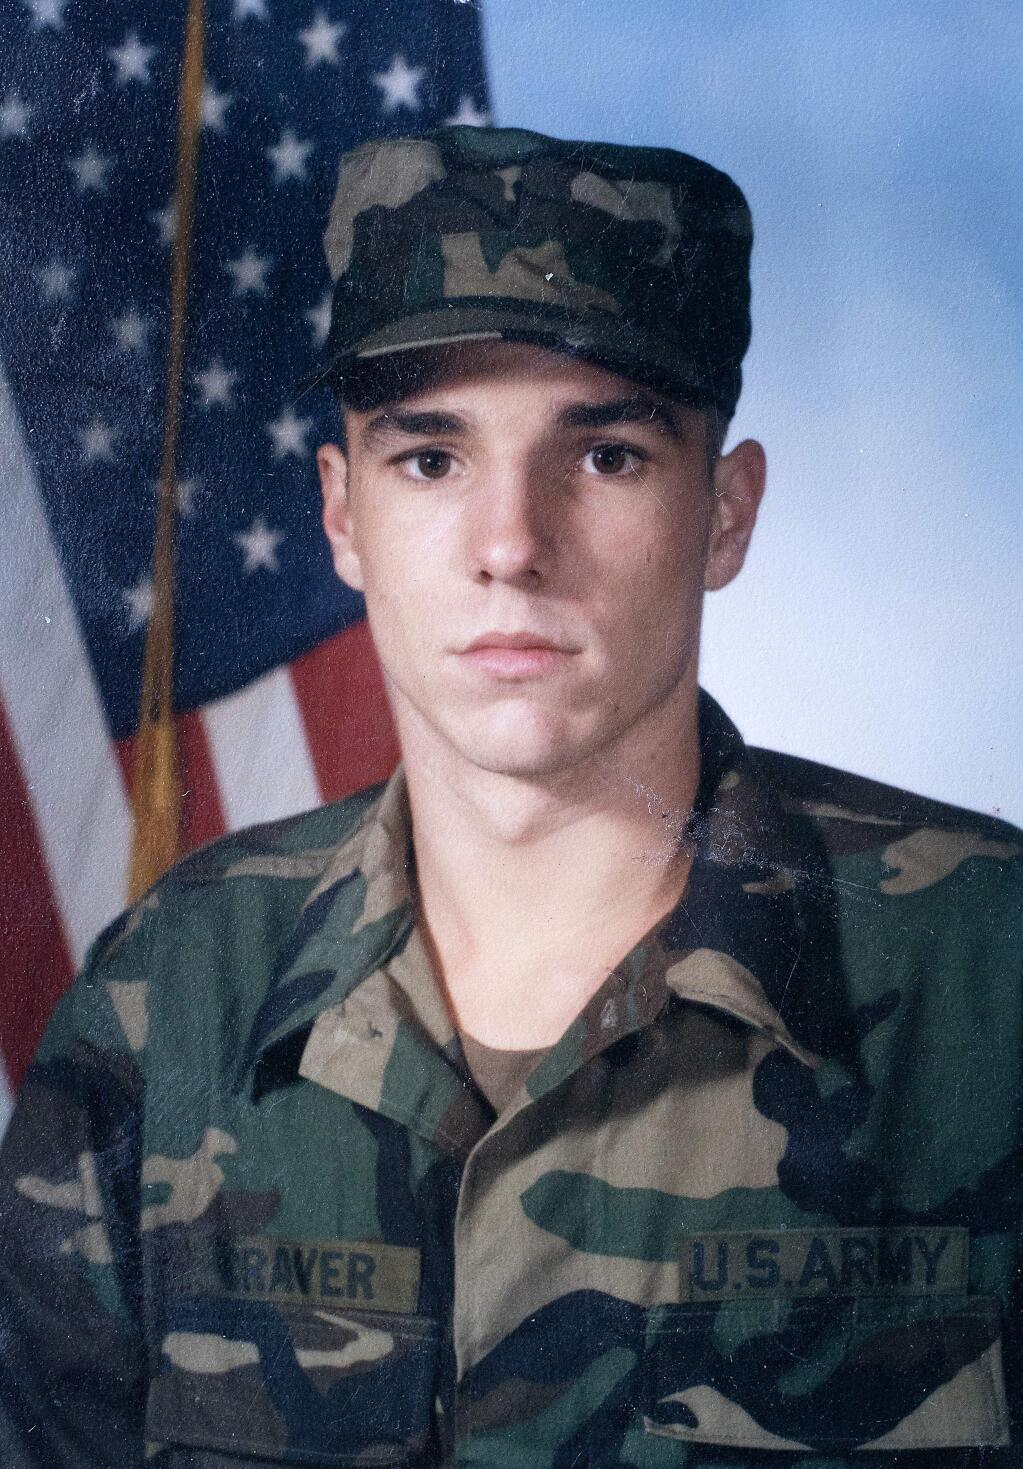 Anthony Craver photo from U.S. Army when he was 18 years-old.